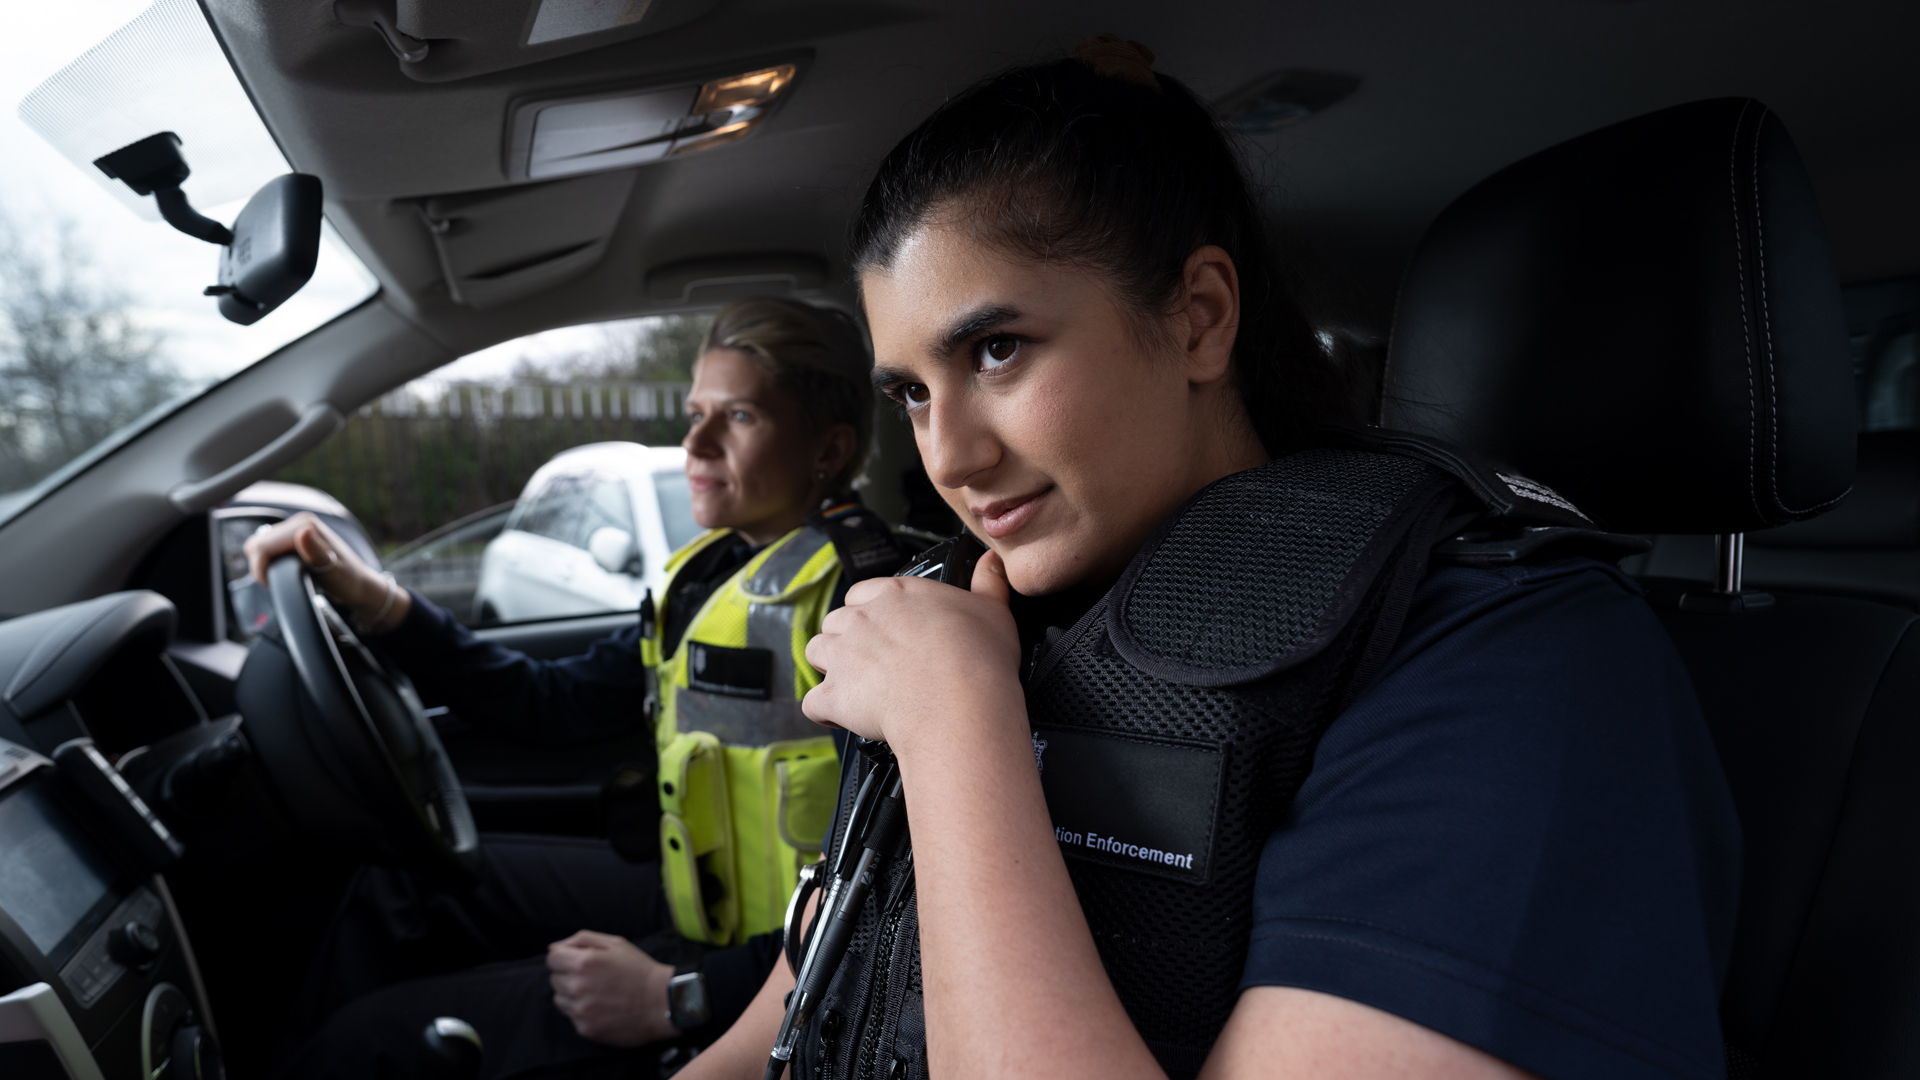 Immigration Enforcement Home Office Careers